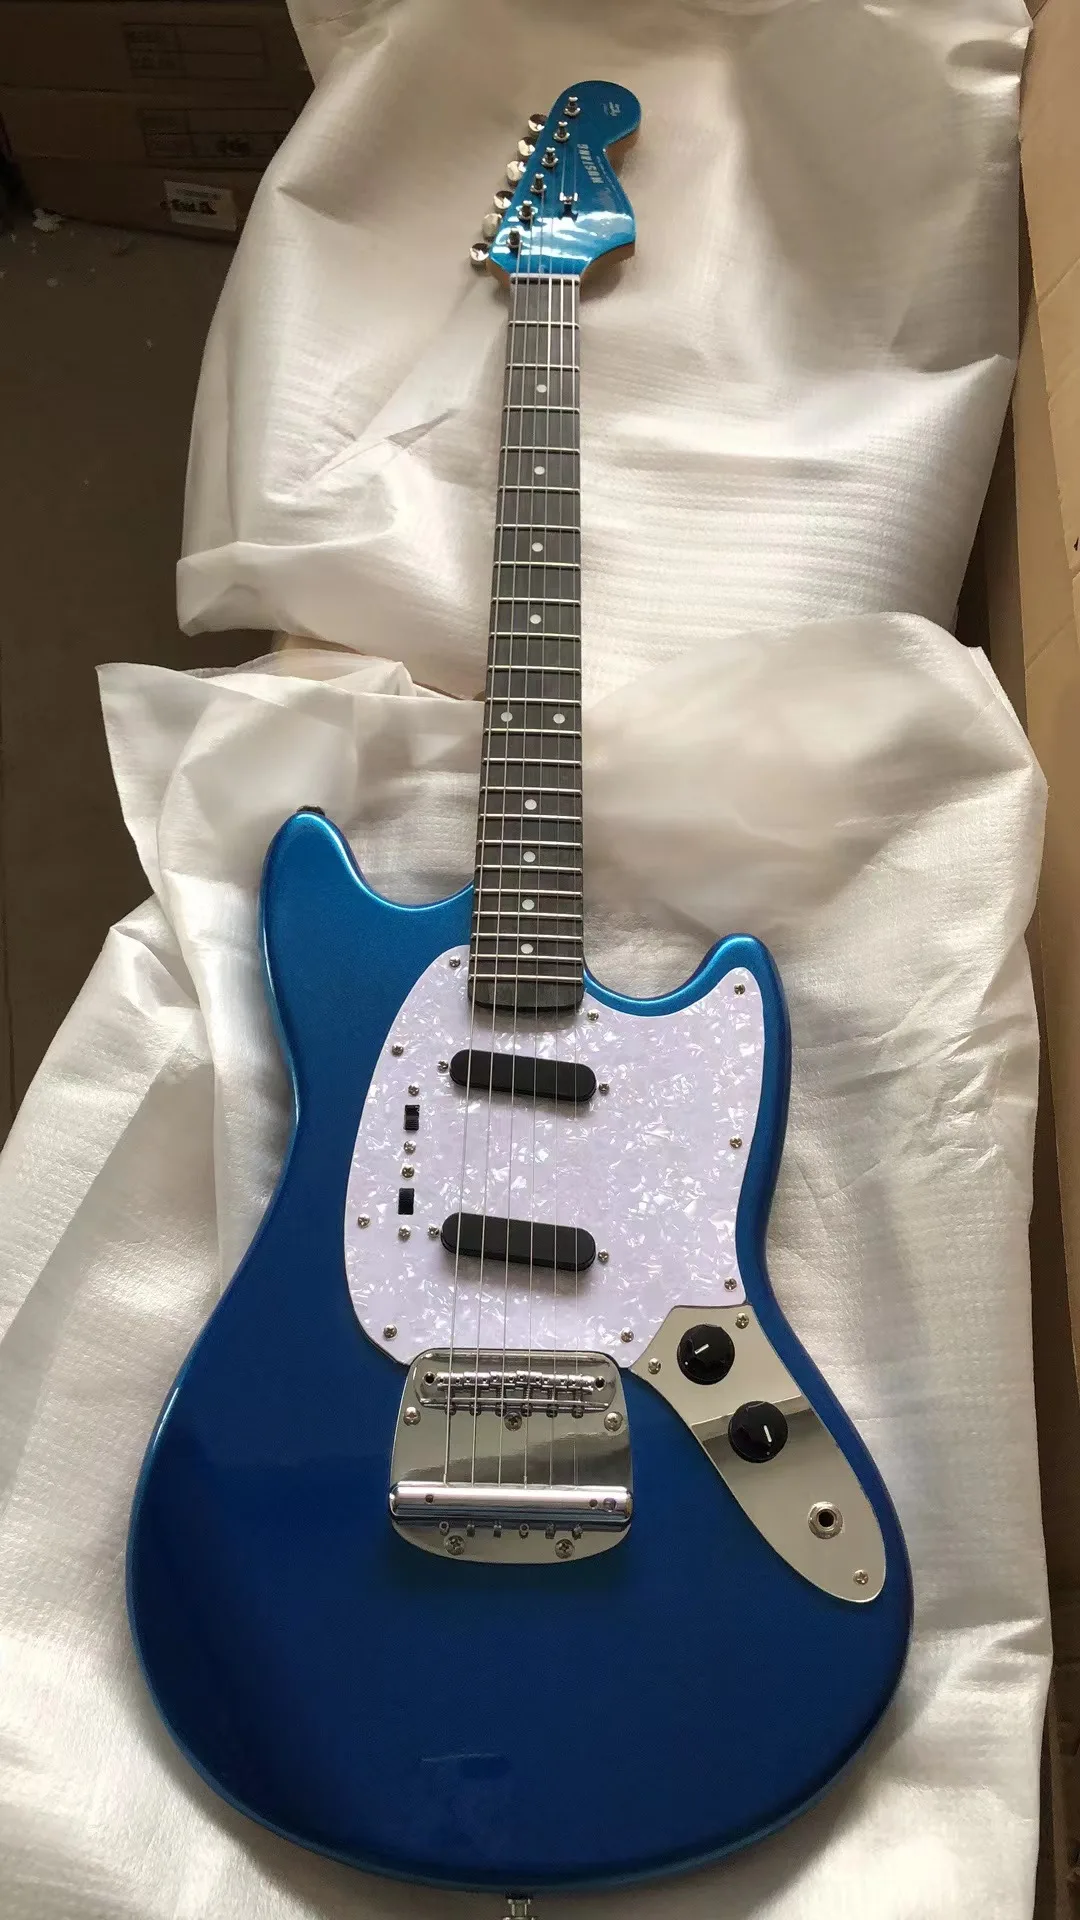 

Blue Mustang 6 Strings Electric Guitar Basswood Body Chrome Hardware Glossy Finish Free Delivery